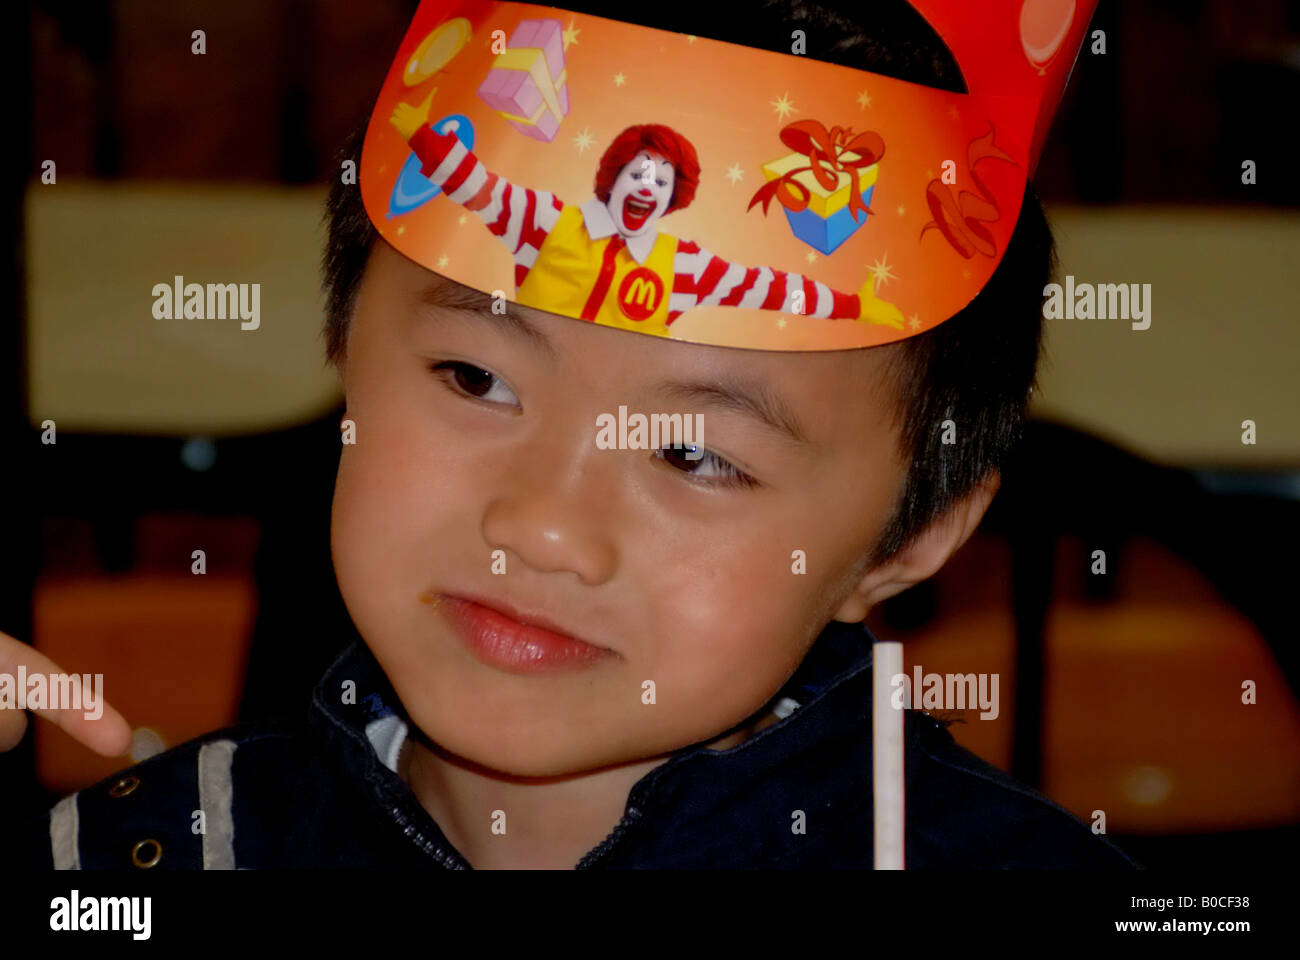 chinese boy in the Mcdonald's have birthday. Stock Photo